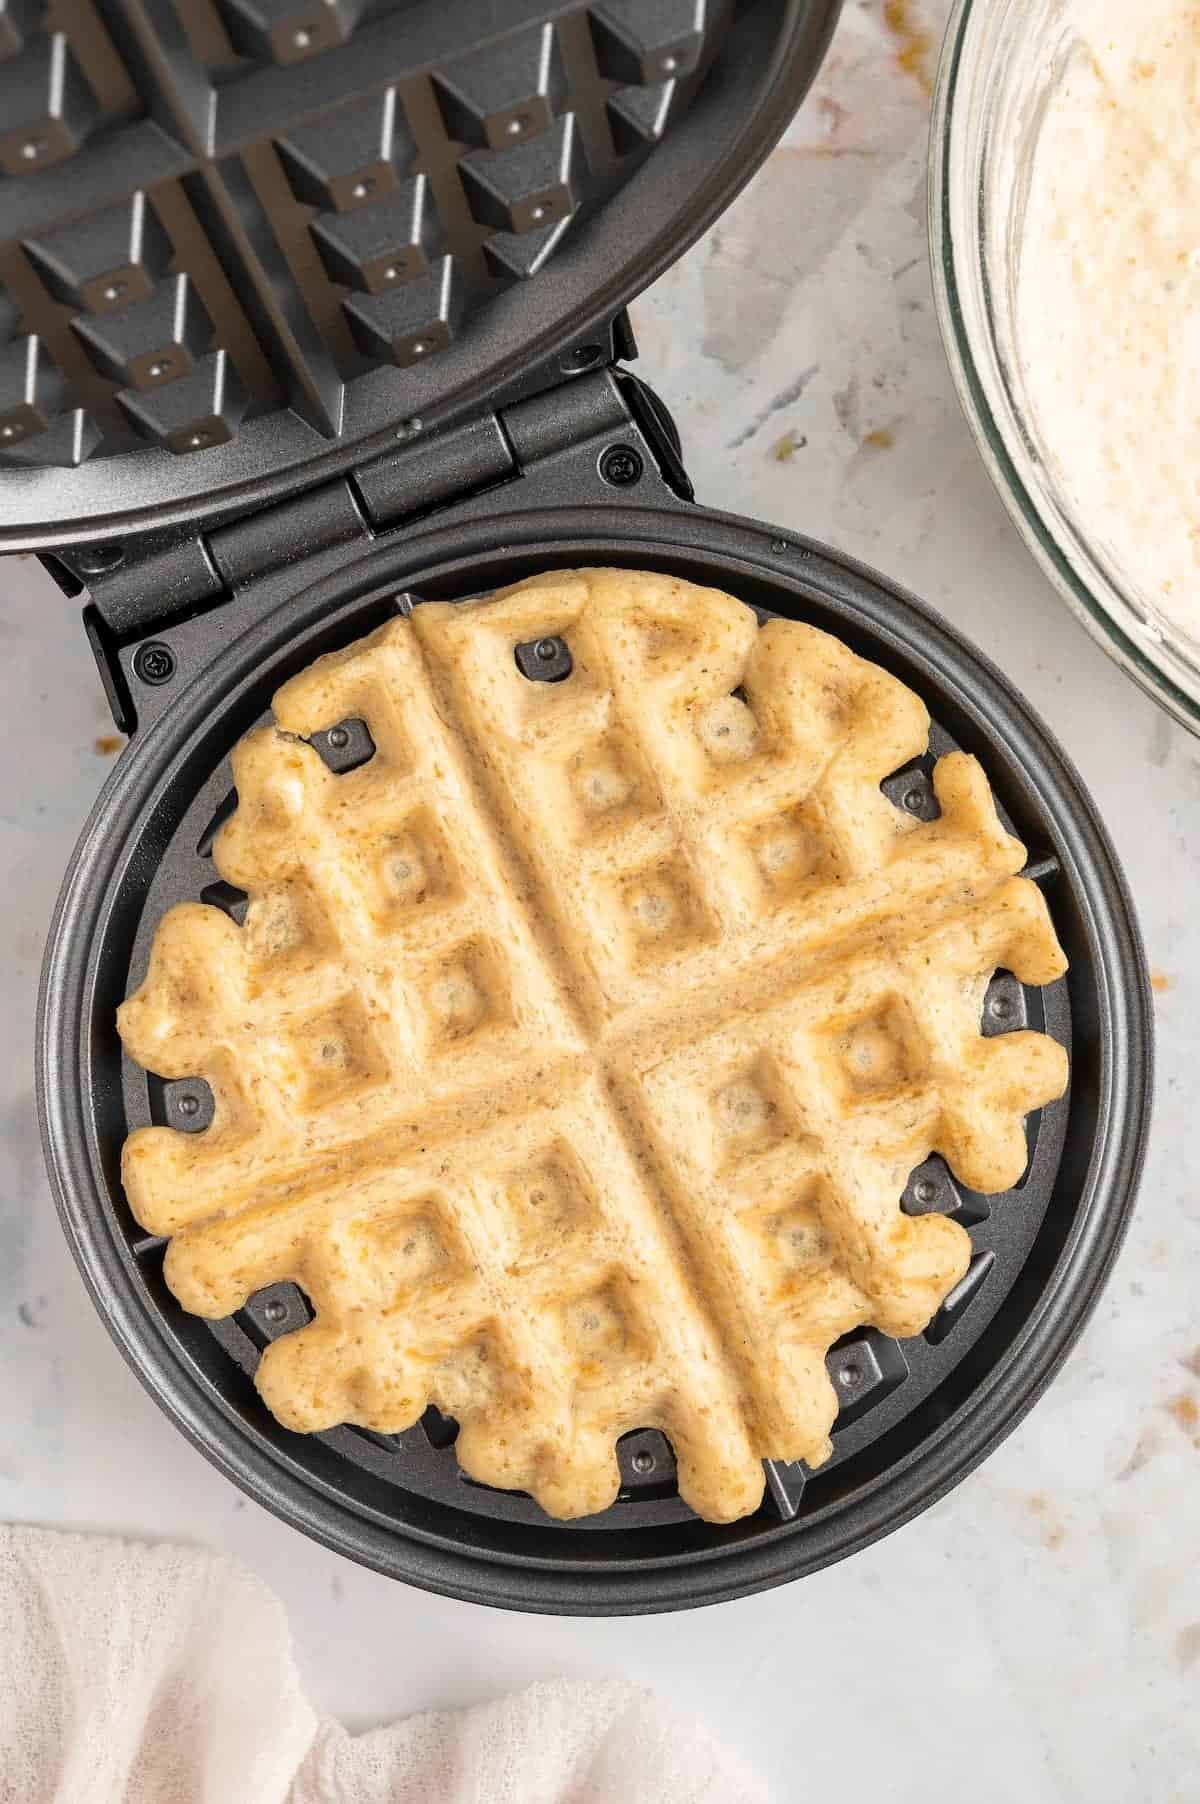 A vegan waffle in a waffle iron.